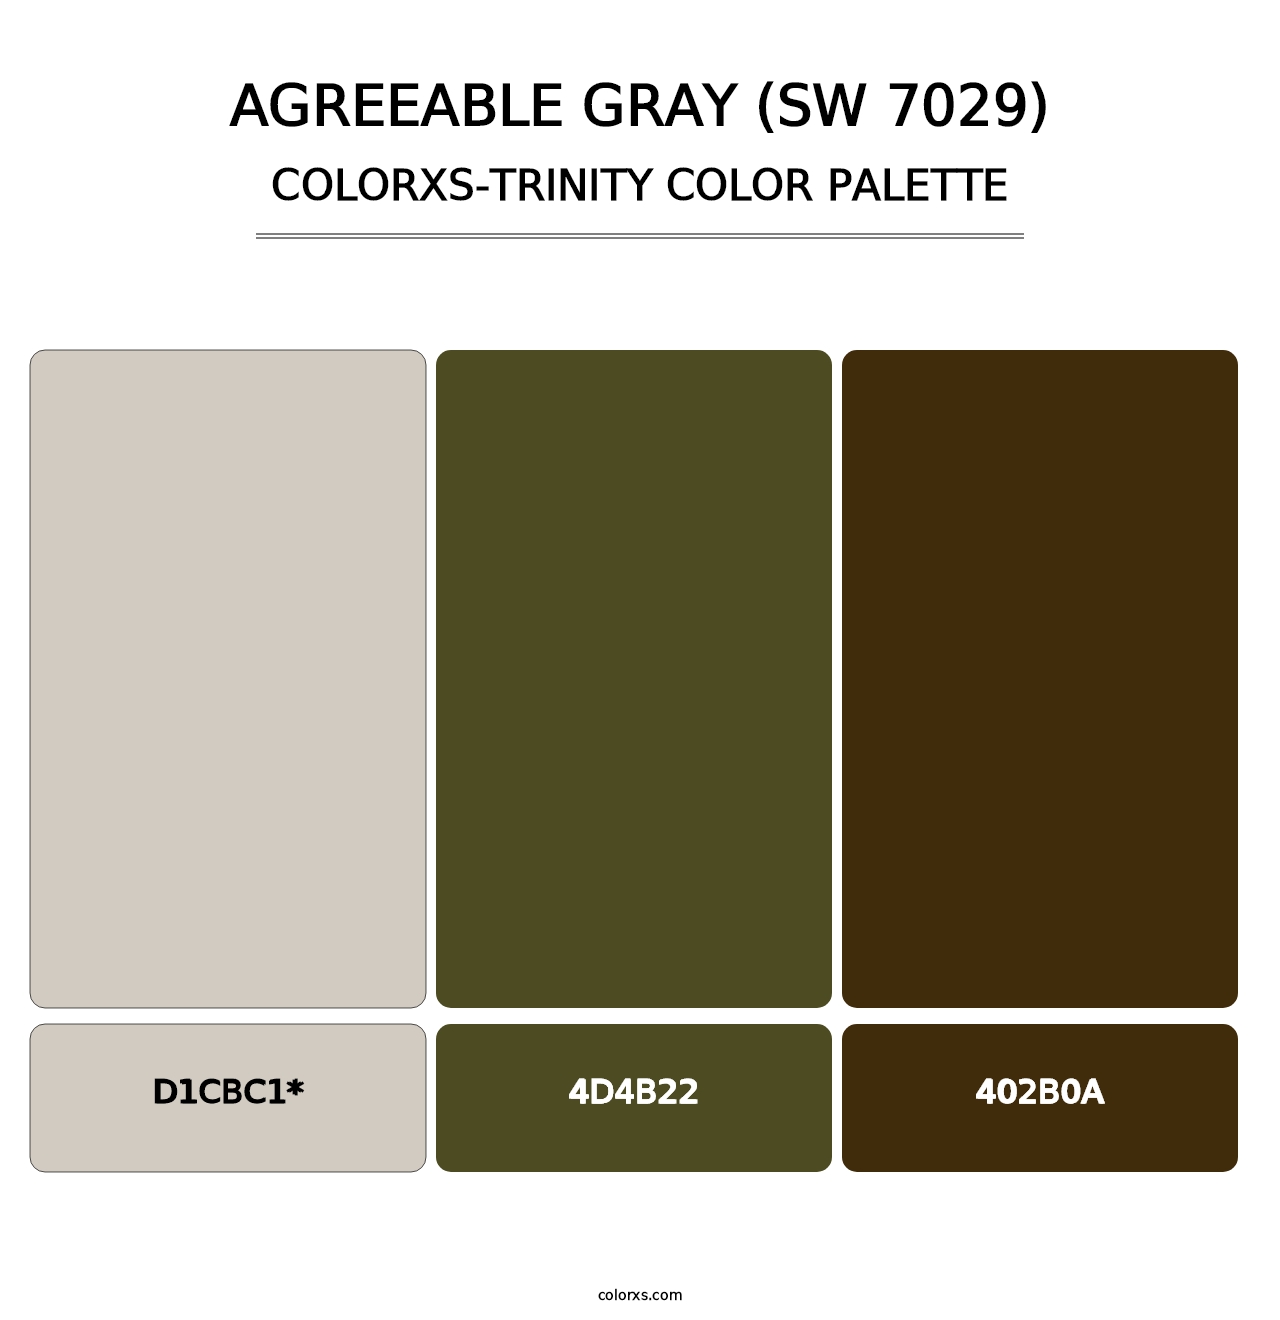 Agreeable Gray (SW 7029) - Colorxs Trinity Palette